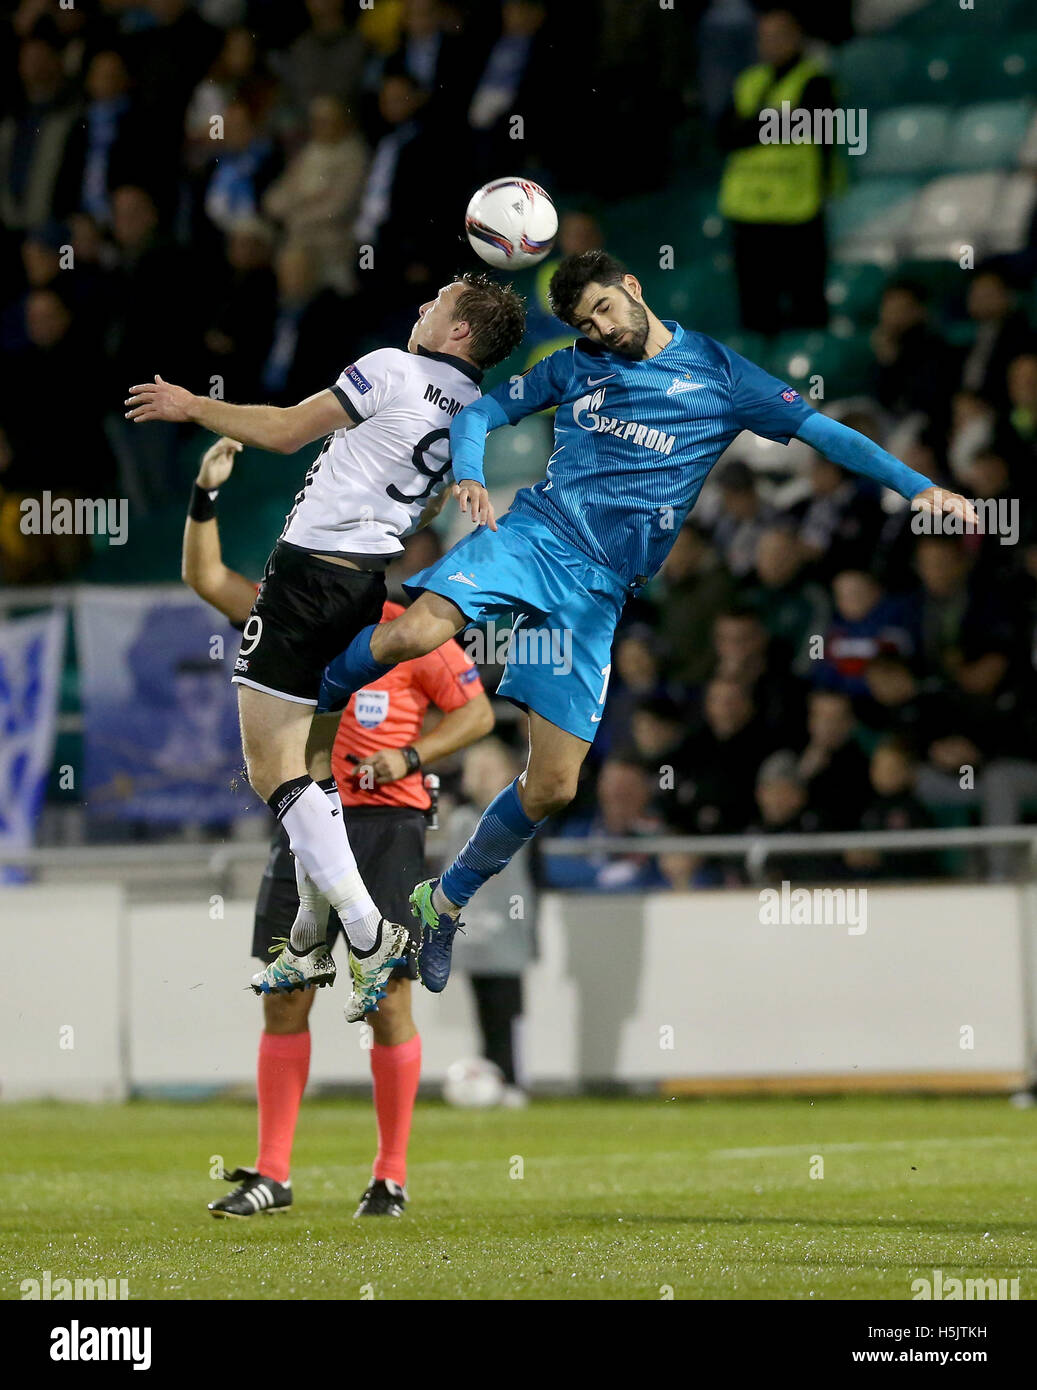 Dundalk's David McMillan (left) and Zenit St Petersburg's Luis Neto battle for the ball during the UEFA Europa League match at Tallaght Stadium, Dublin. Stock Photo